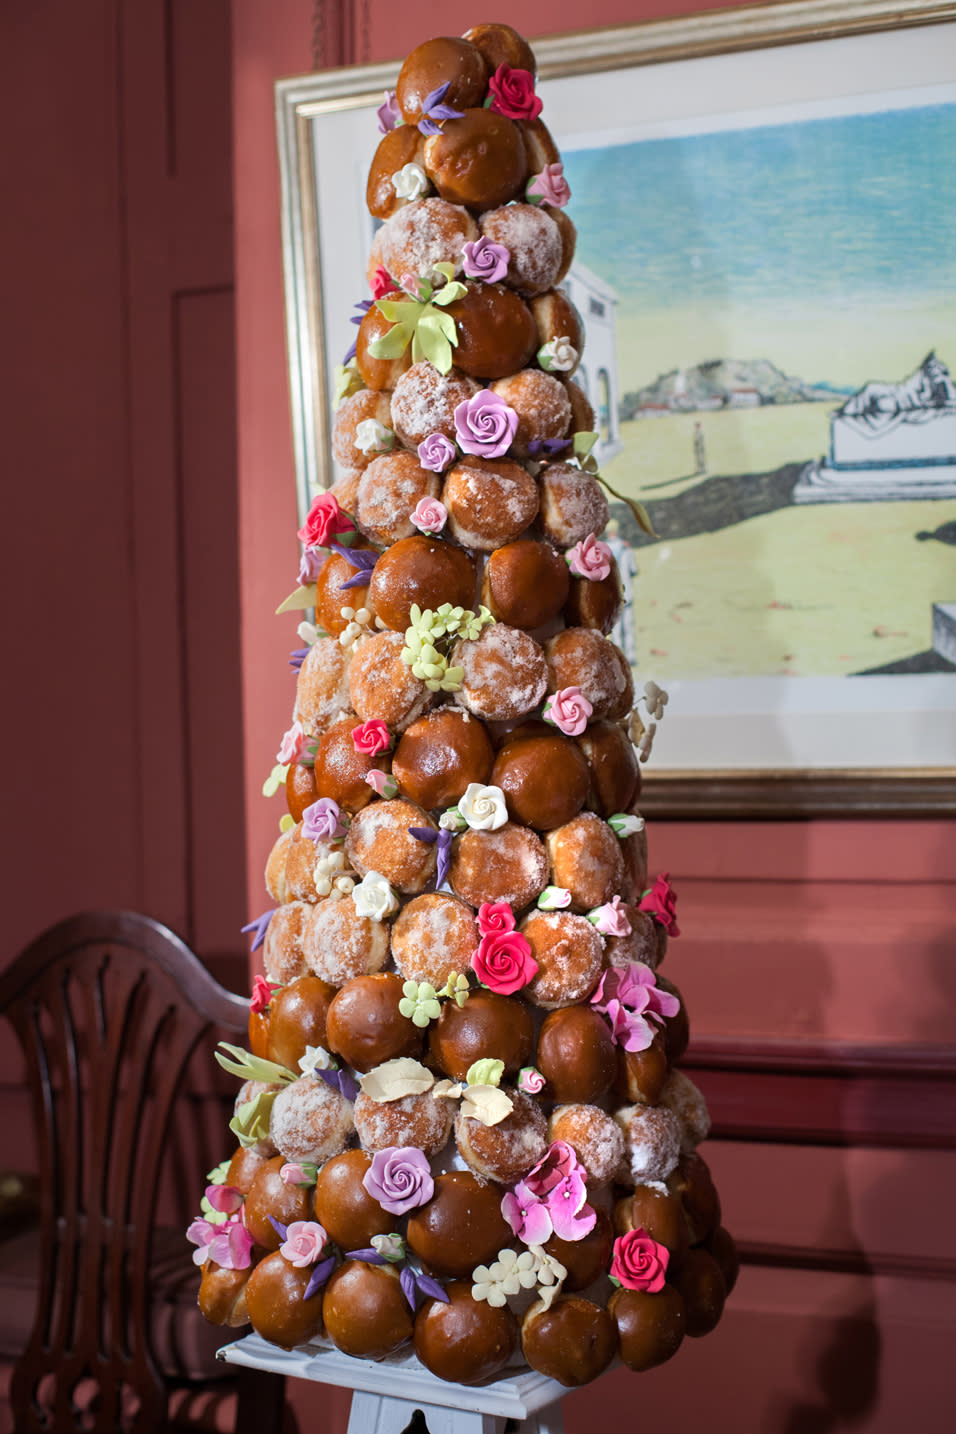 A tower of cakes and doughnuts is furnished with colourful flower-shaped icing (Tate & Lyle)